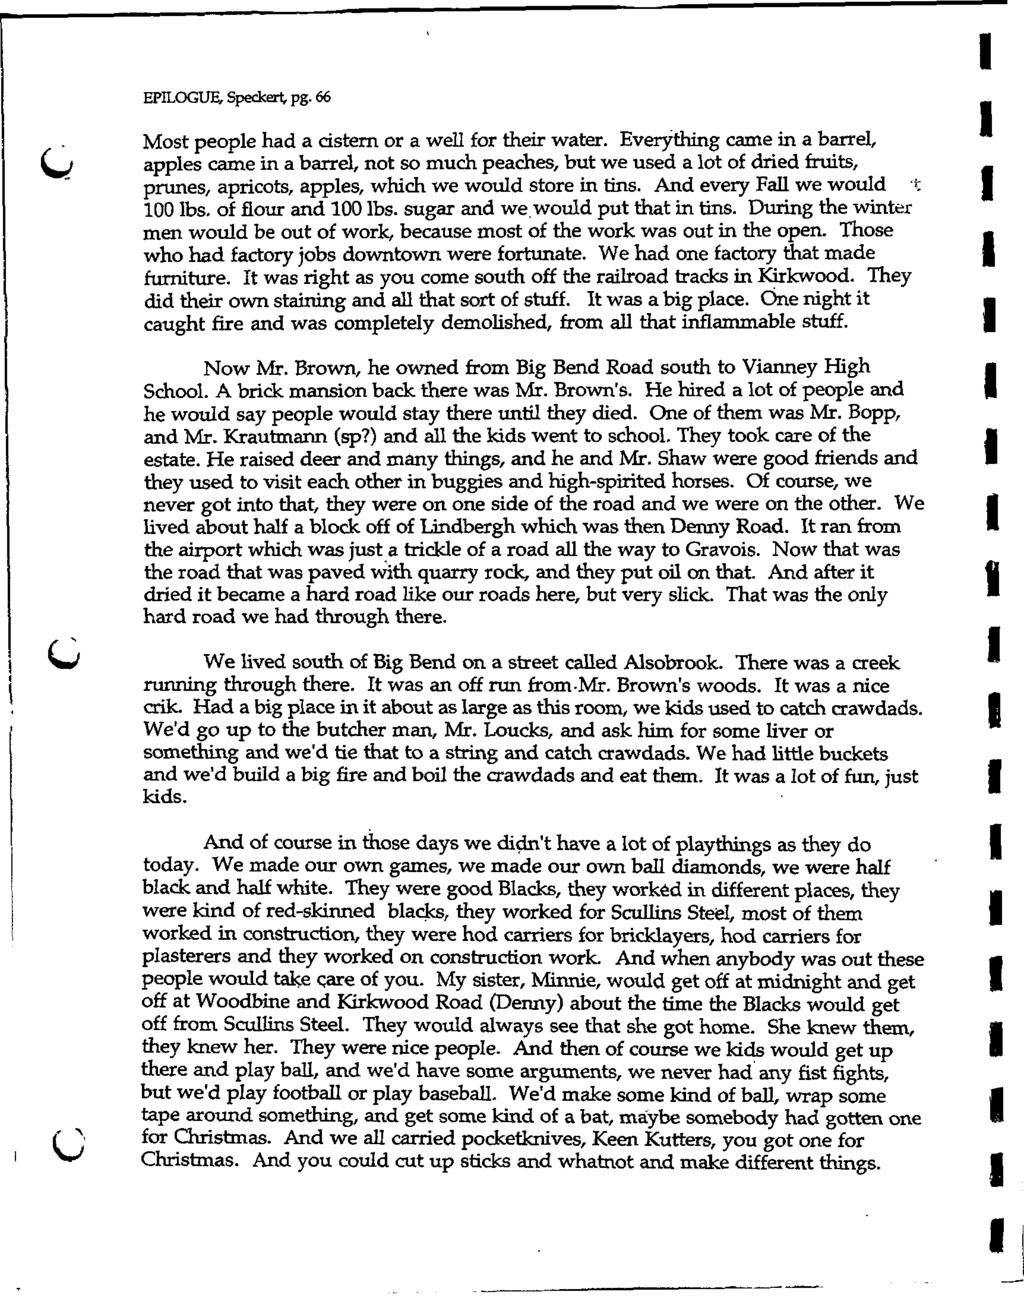 EPLOGUE, Speckert pg. 66 Most people had a cstern or a well for ther water.